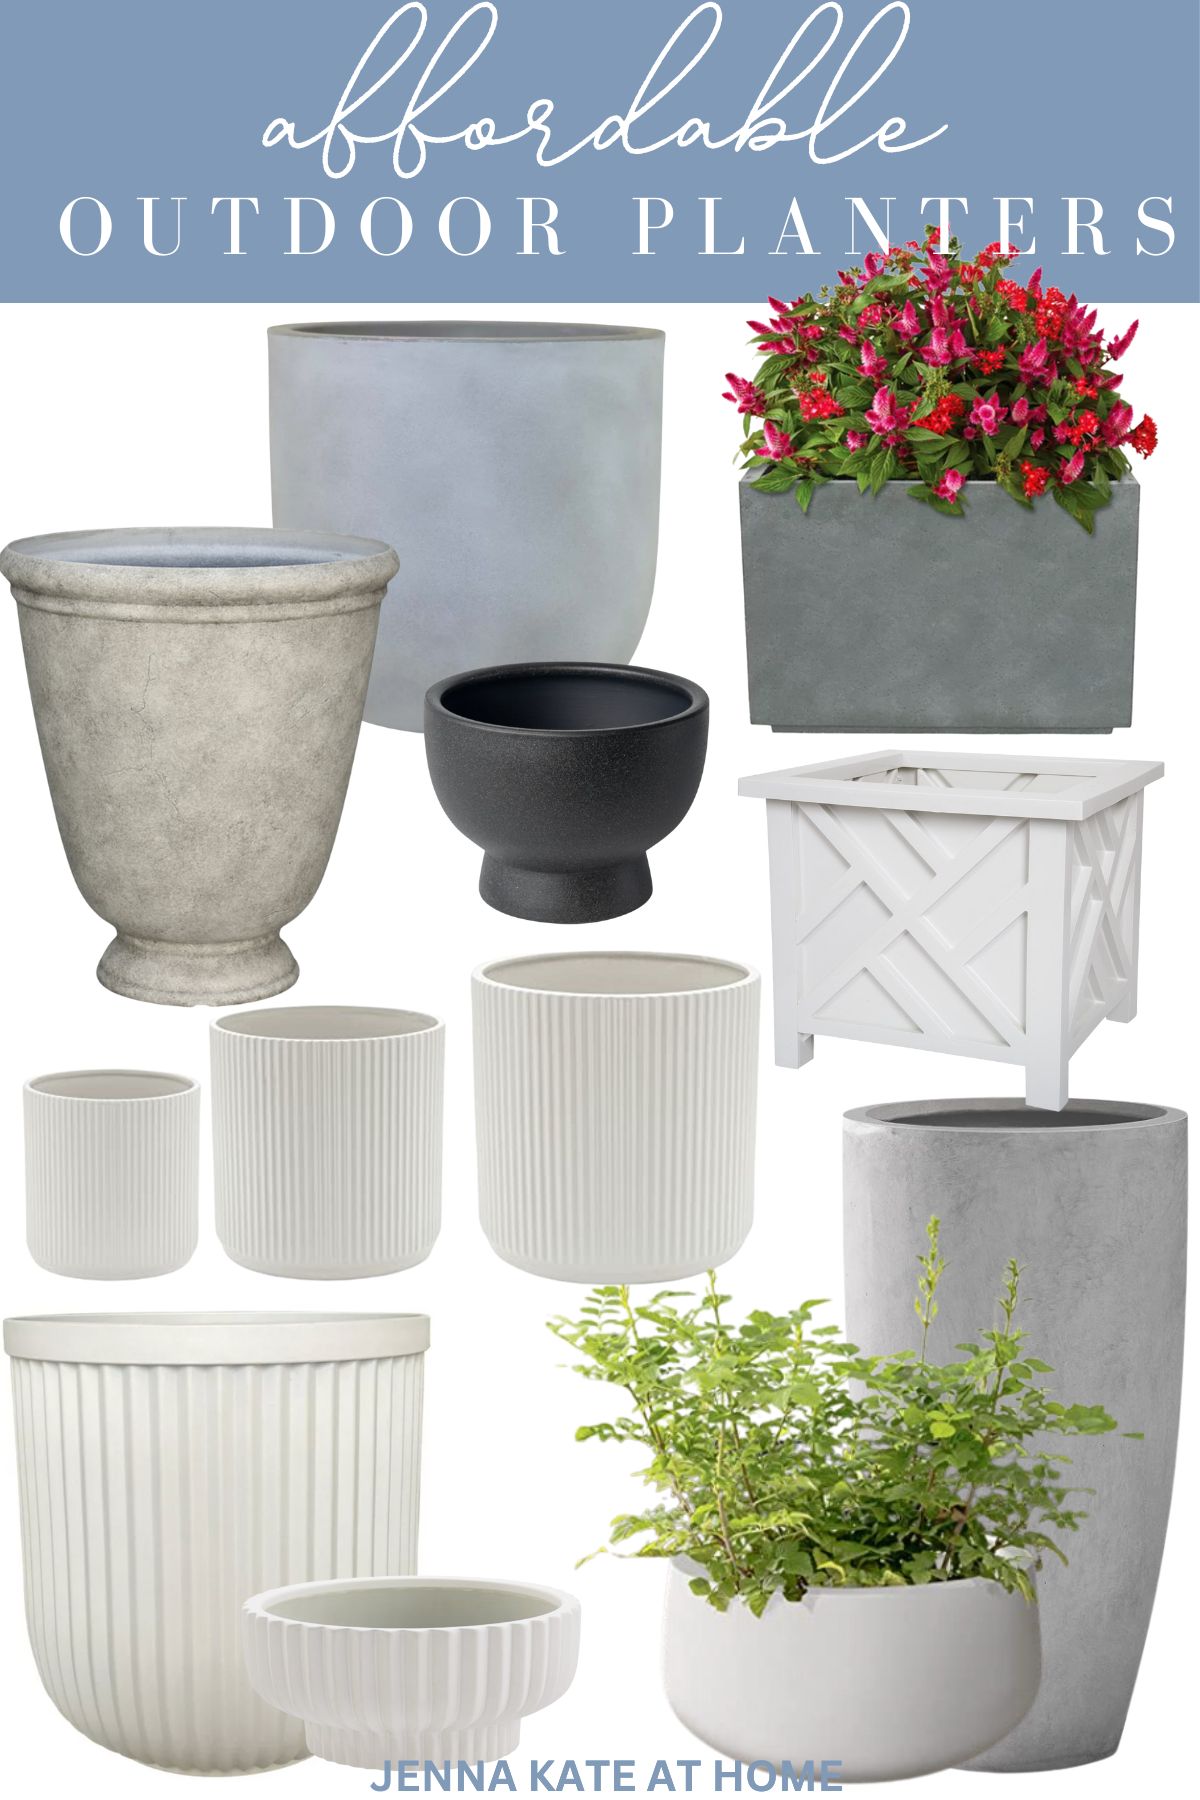 Outdoor Planters: Styles For Every Budget